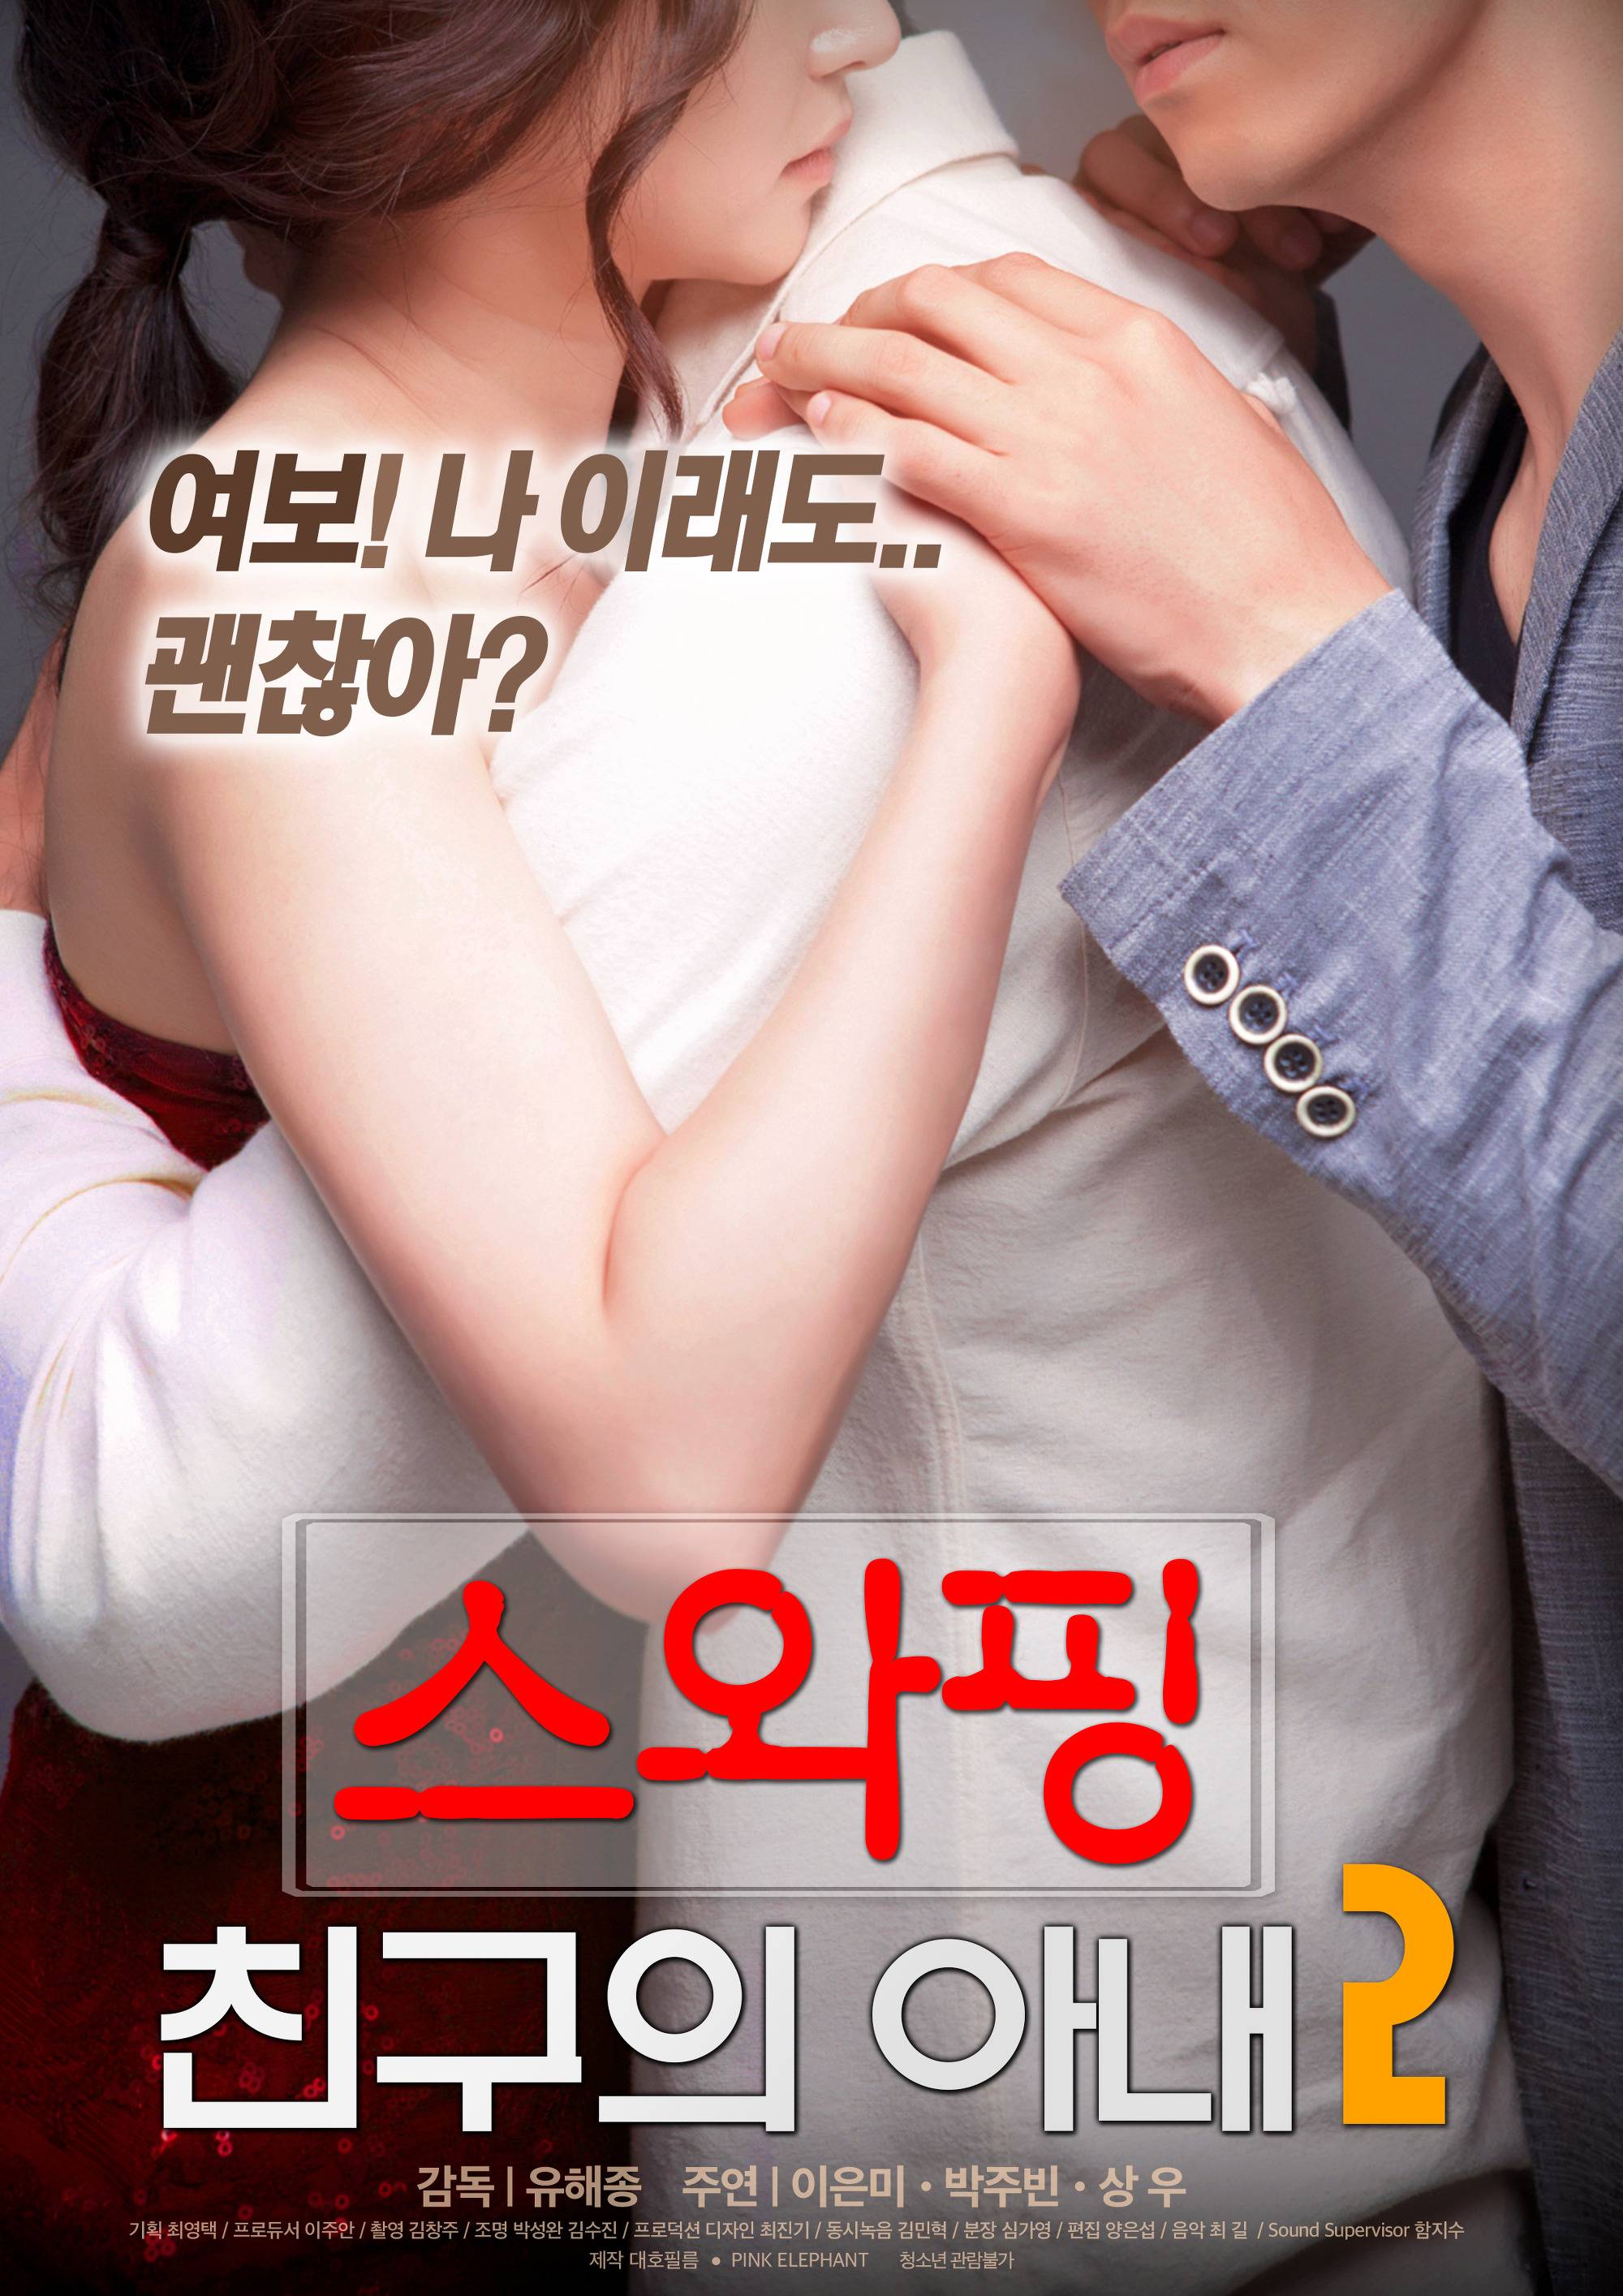 New Movie Friends Will Do Anything to Help Each Other in Swapping My Friends Wife 2 HanCinema image pic